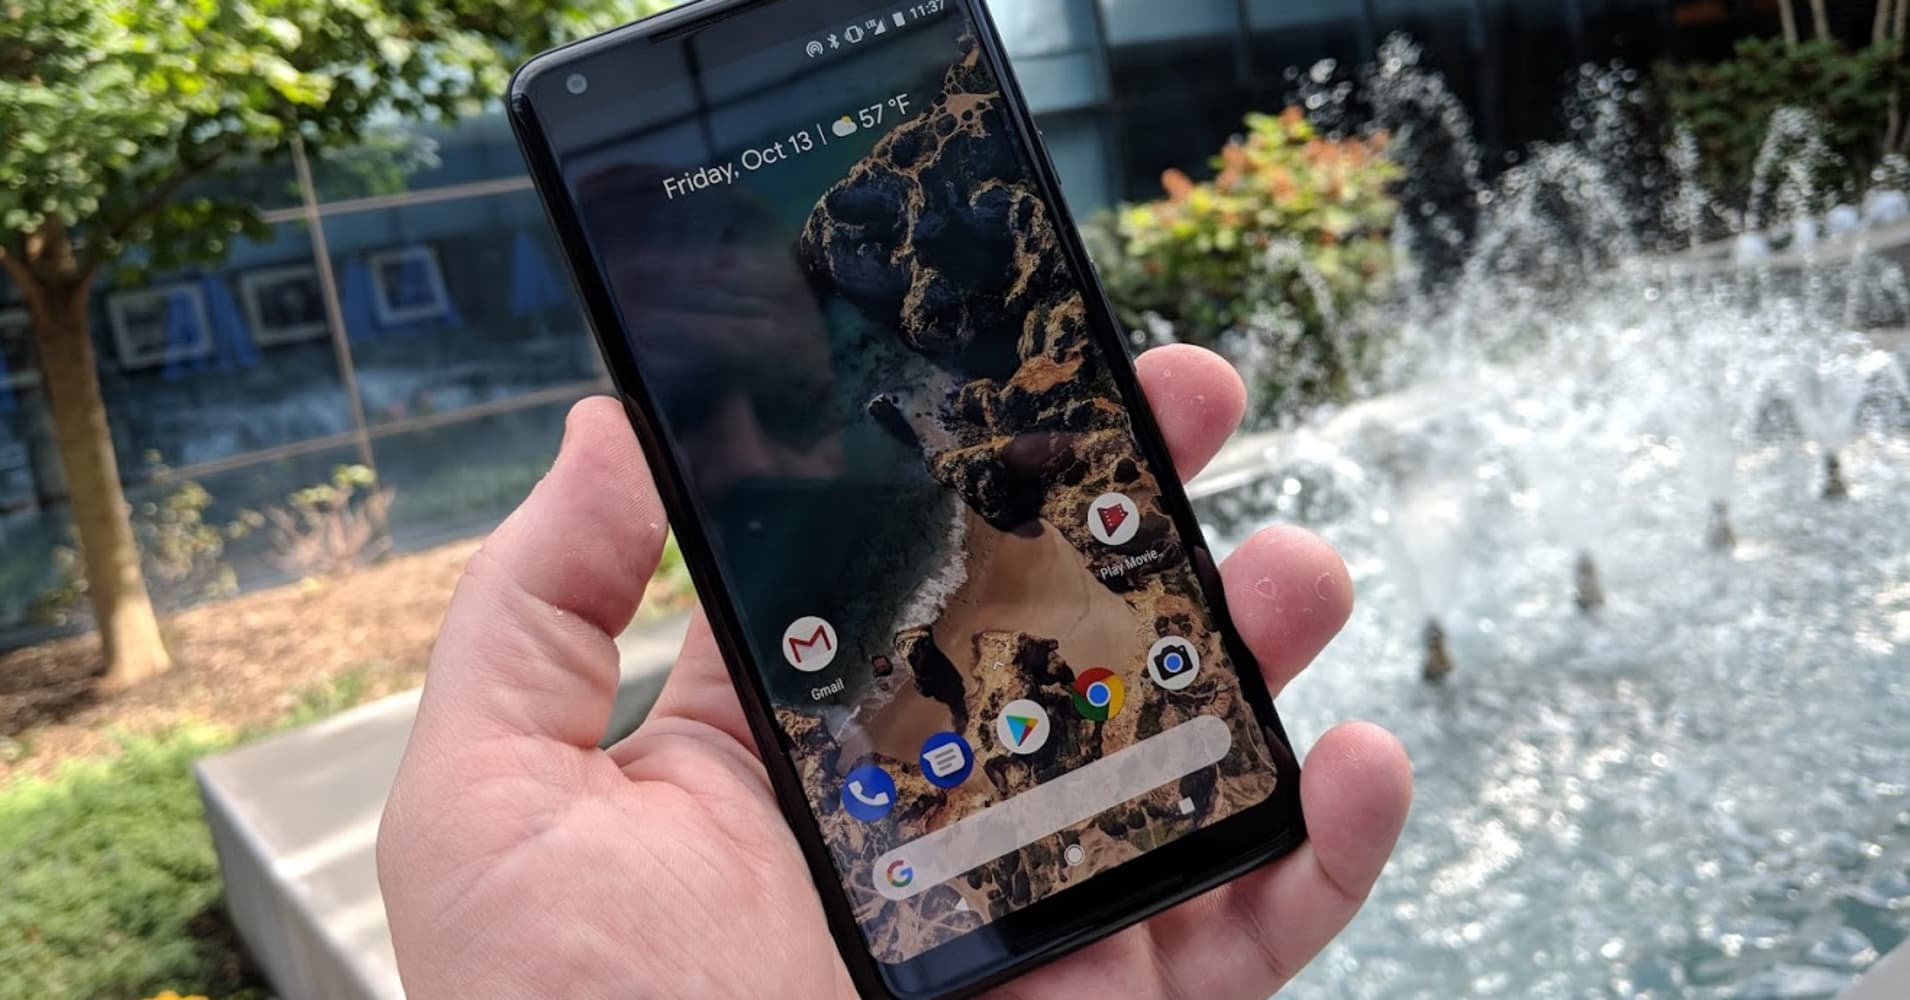 Some of Google's new Pixel 2 XL phones are being shipped without Android installed